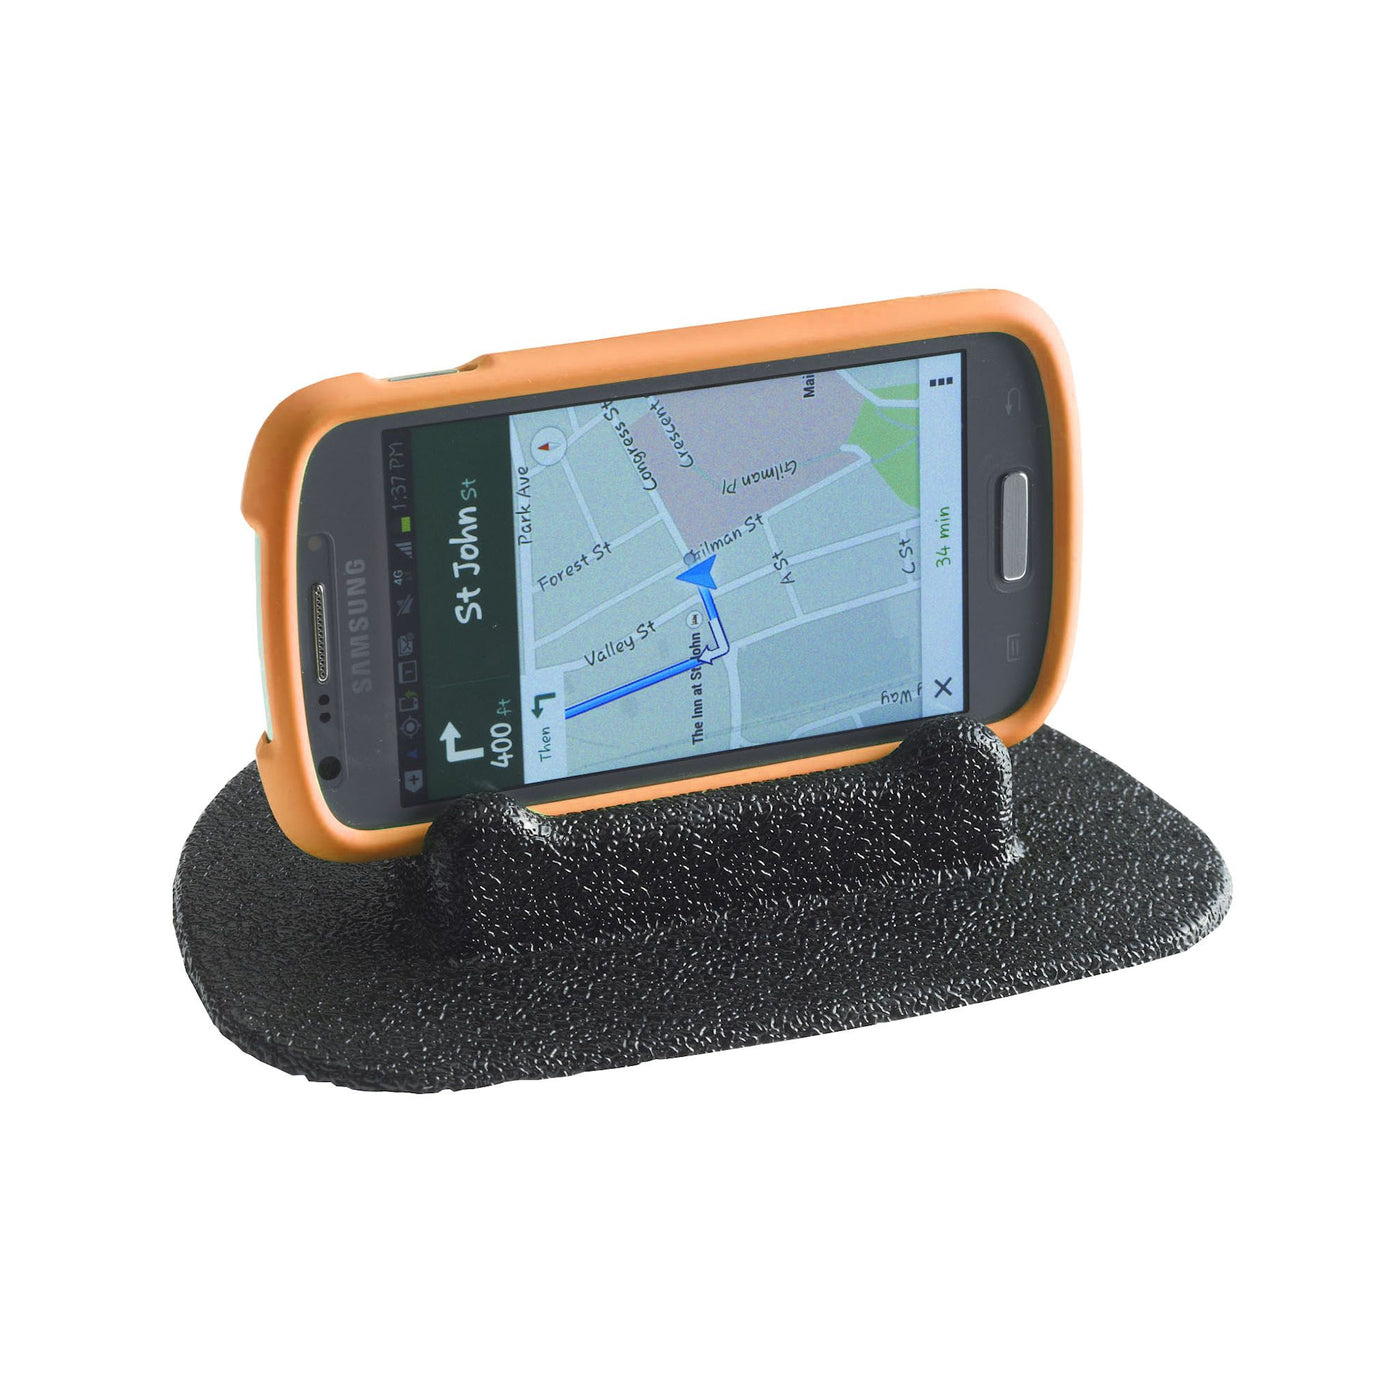 AAA.com  High Road Dash Stand Car Cell Phone Holder